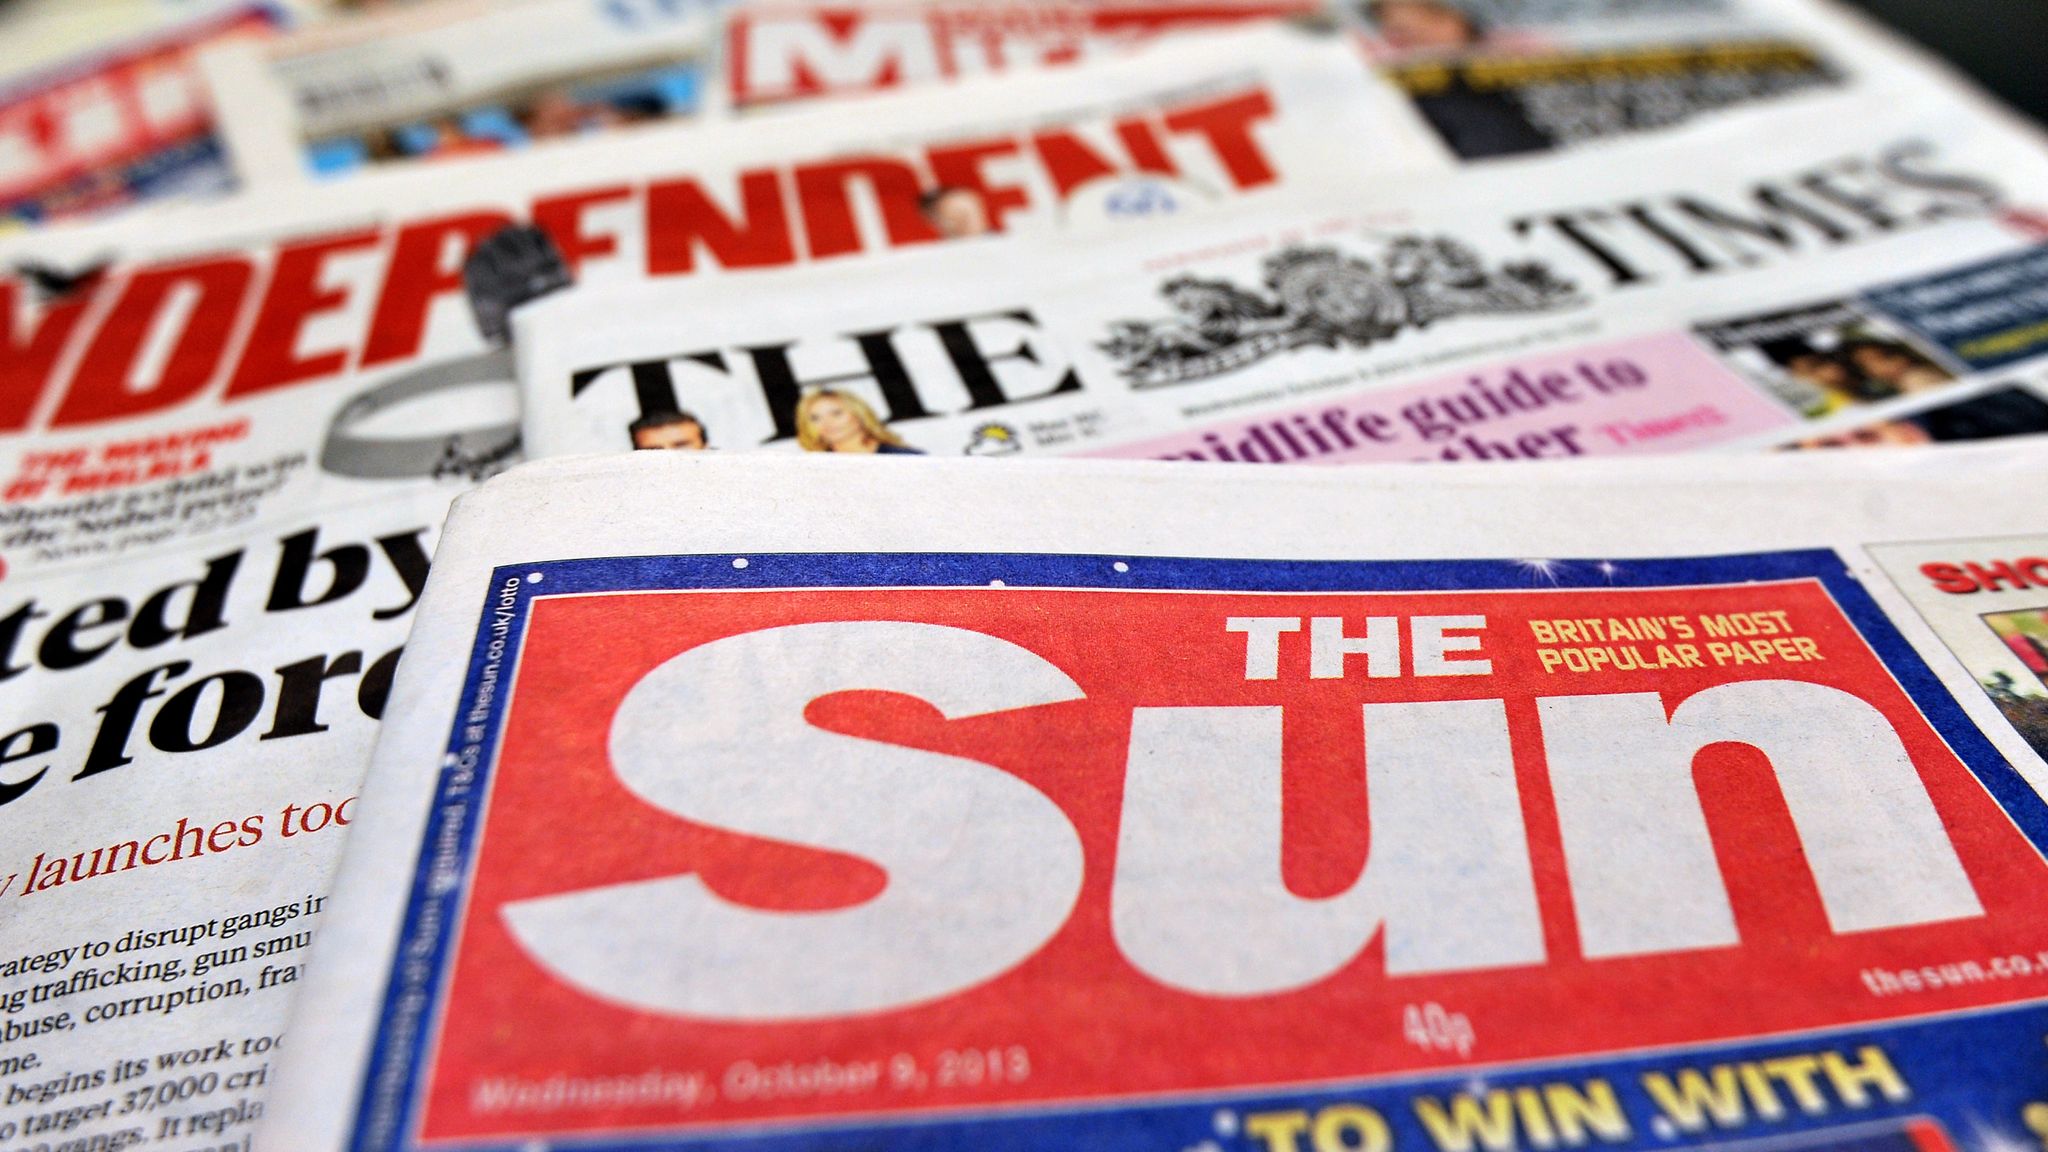 News UK owns newspapers including The Sun and The Times